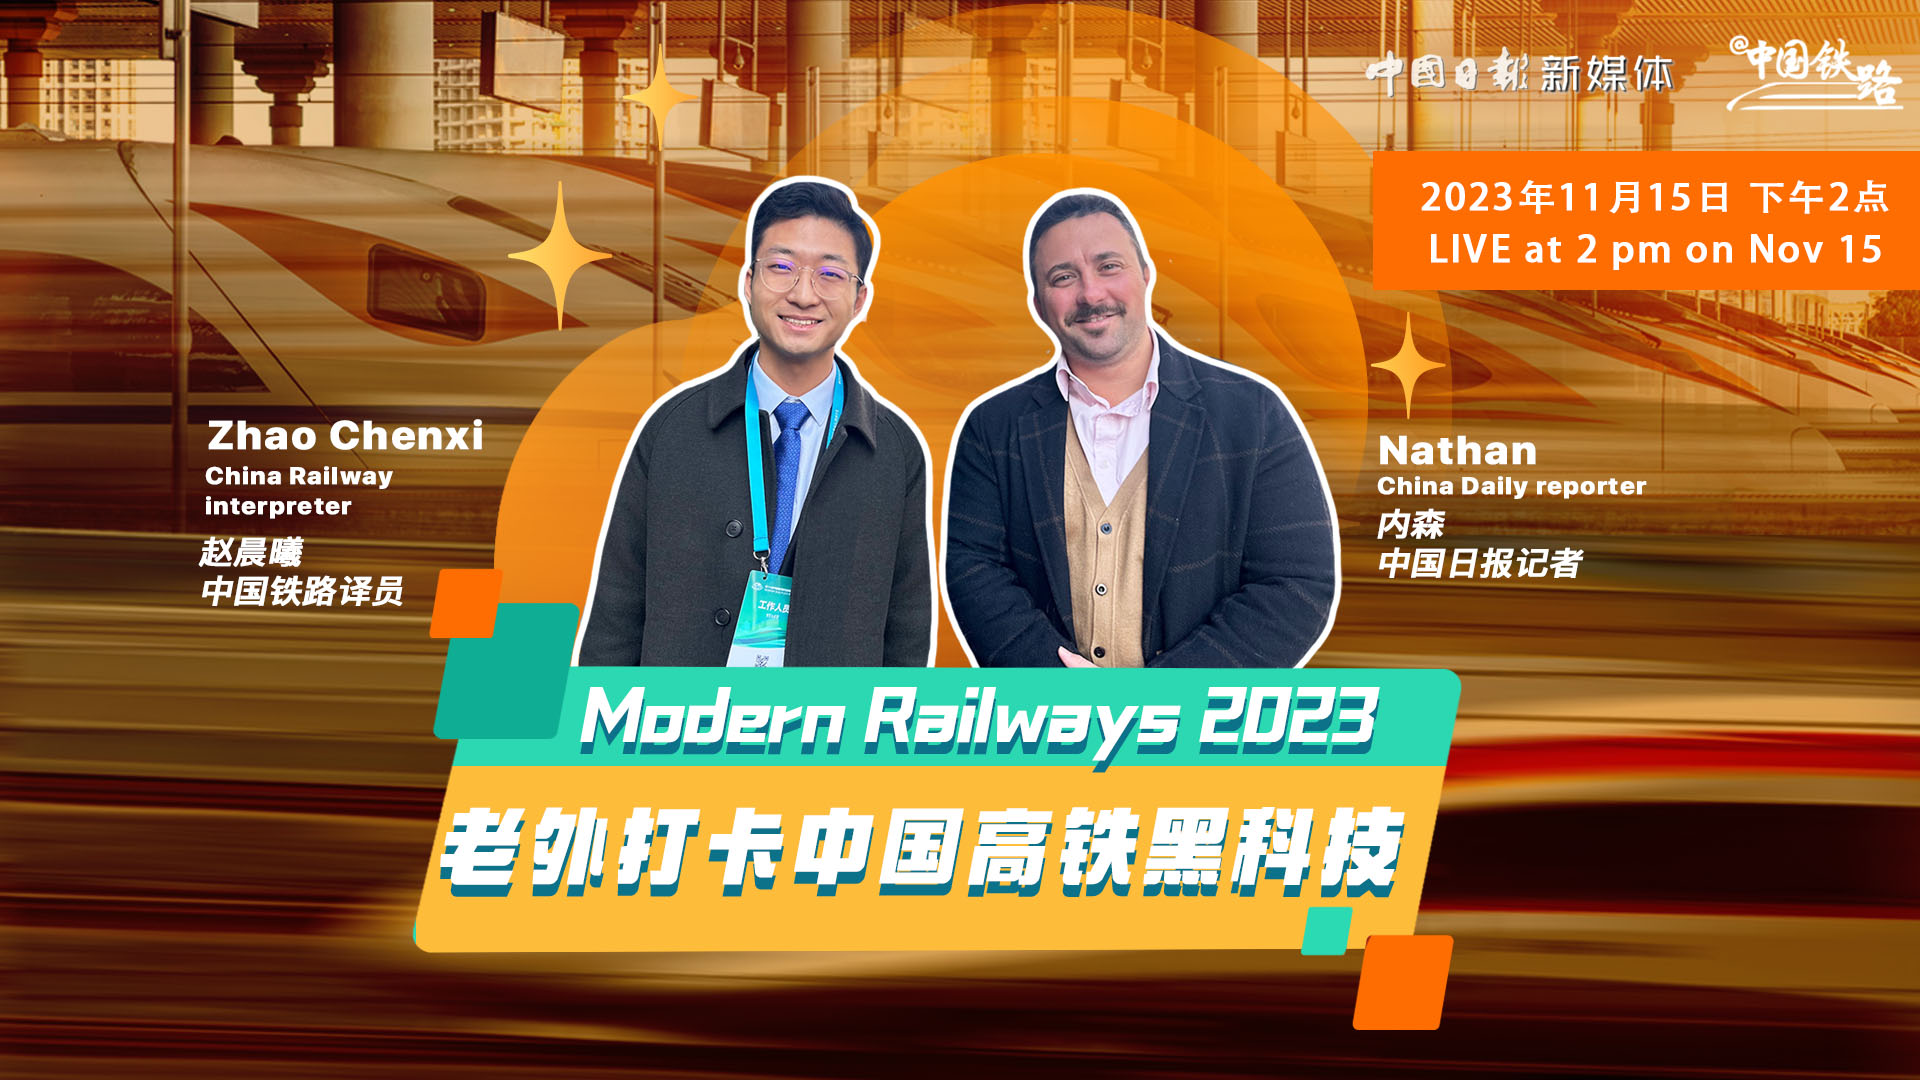 Watch it again: Modern Railways 2023 is on the right track